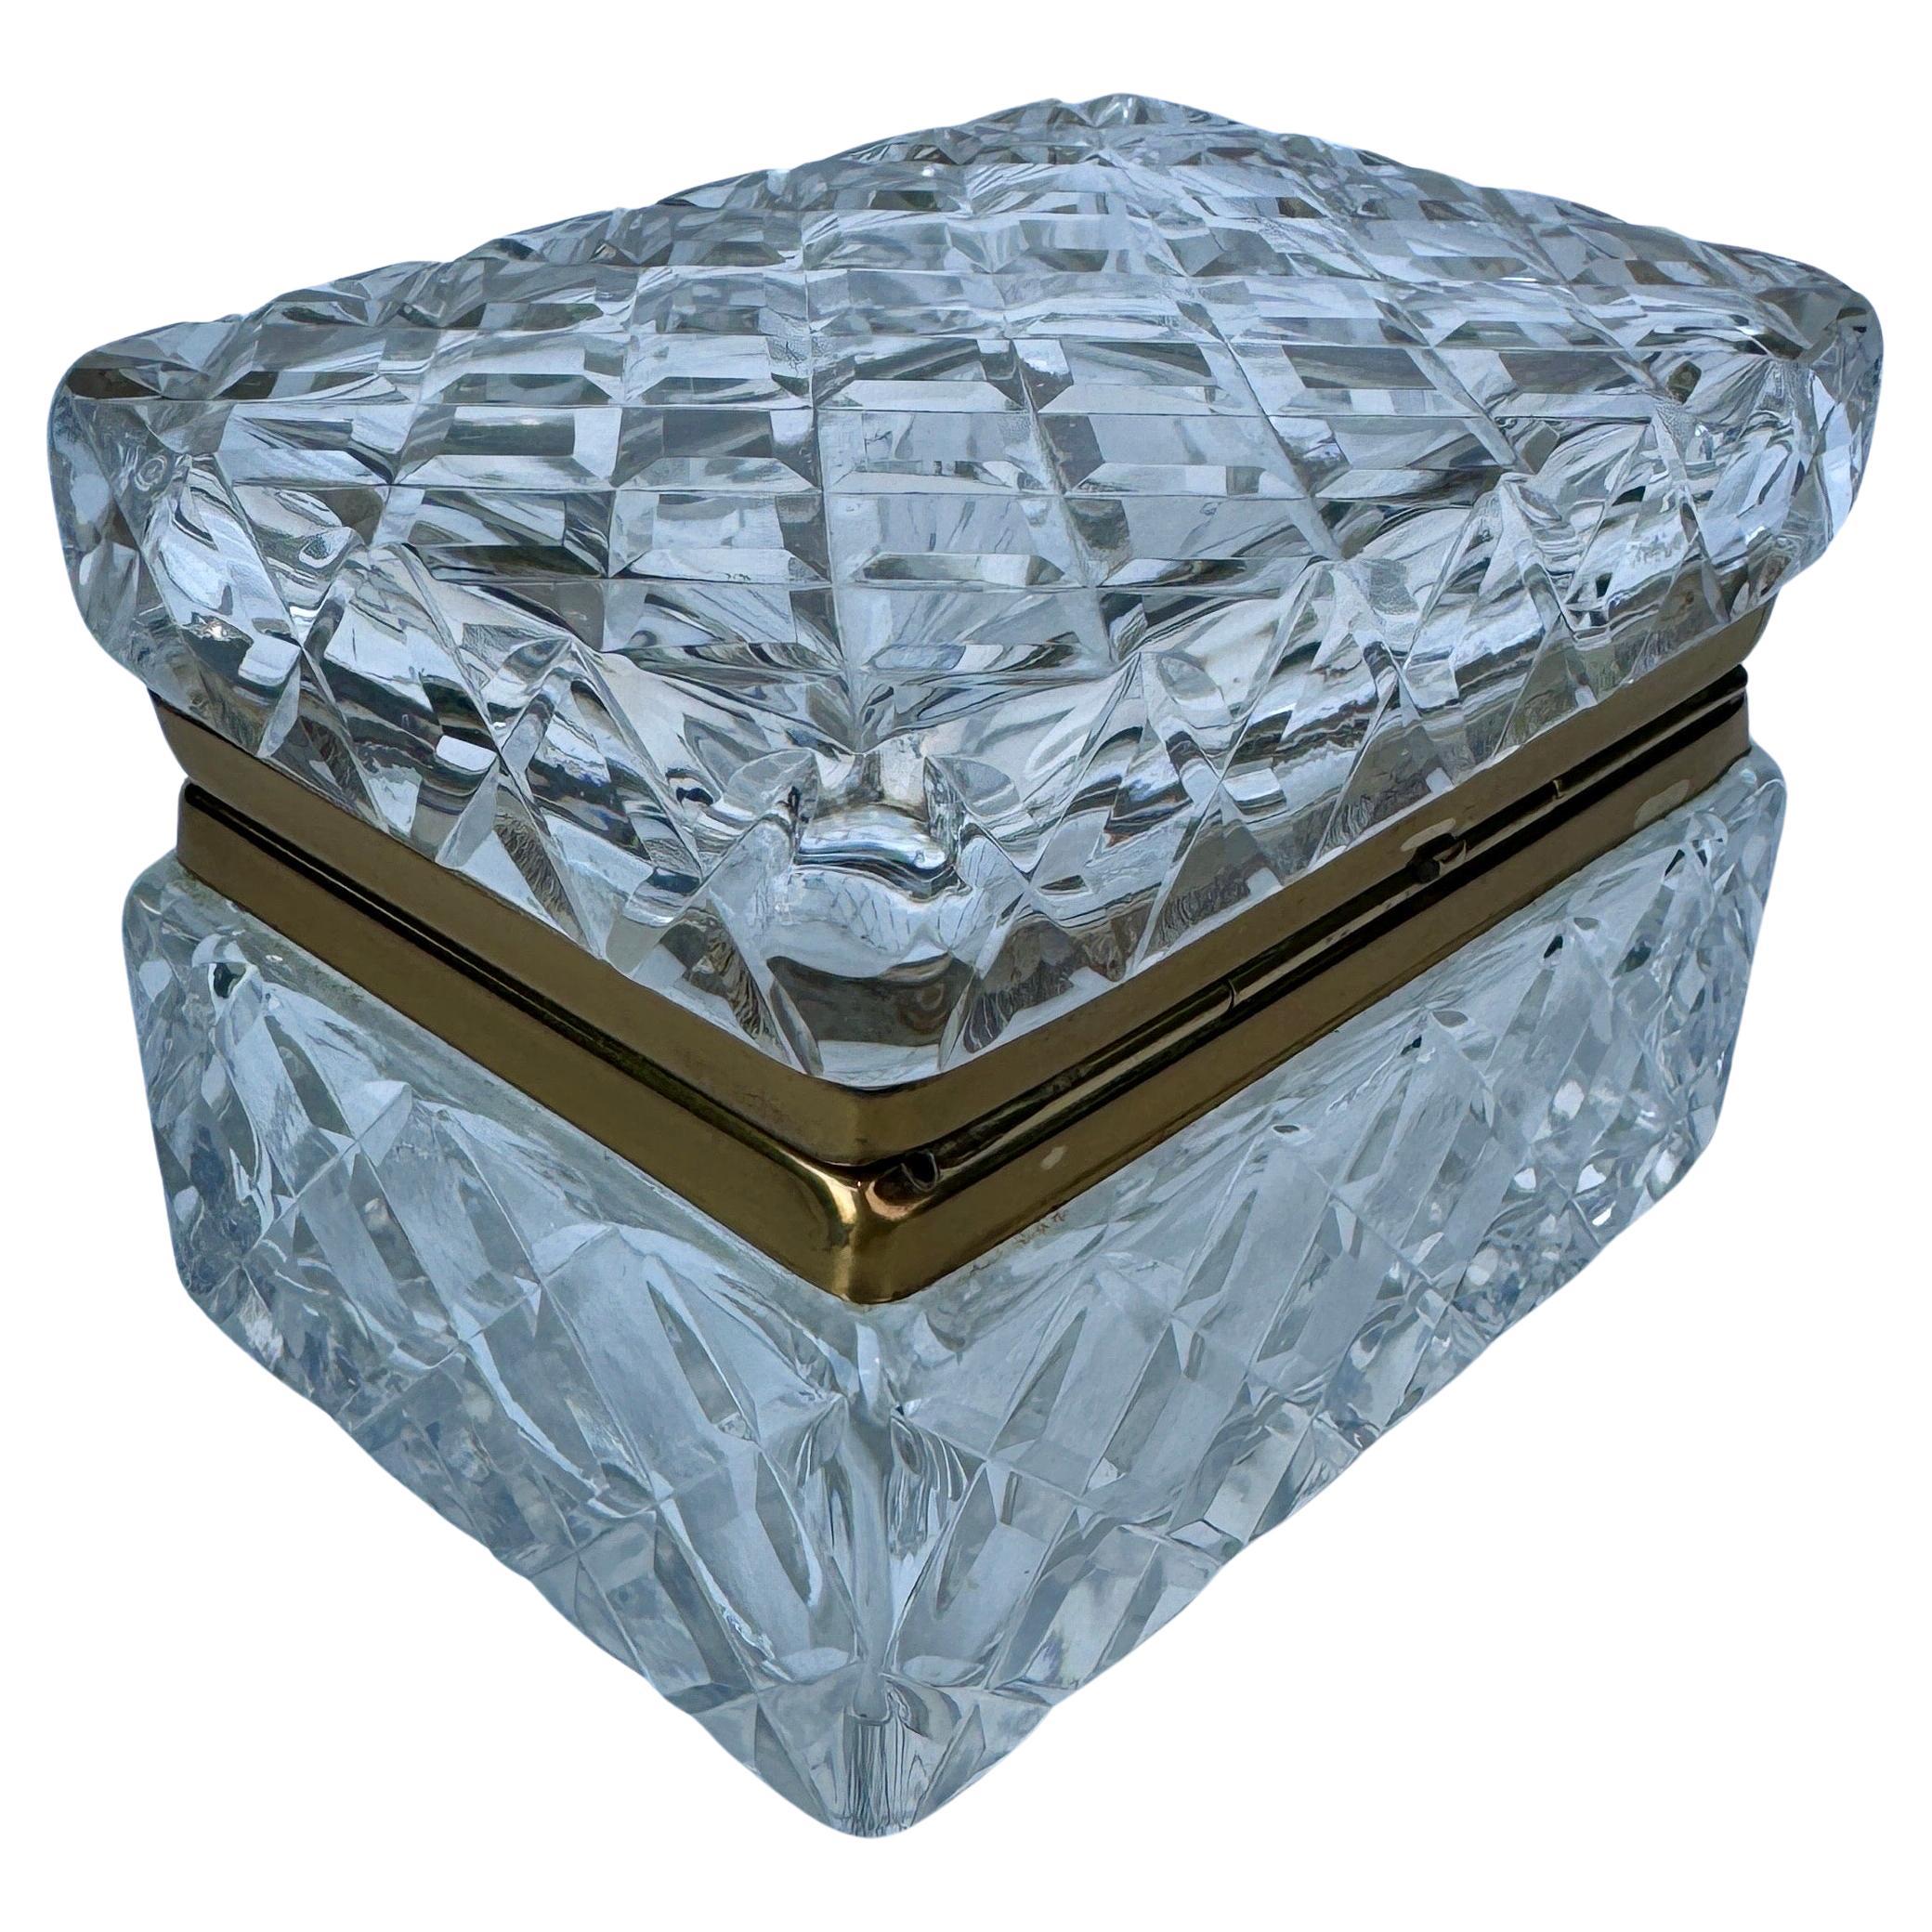 Small Rectangular Cut Glass Candis or Jewelry Box In Good Condition For Sale In Haddonfield, NJ